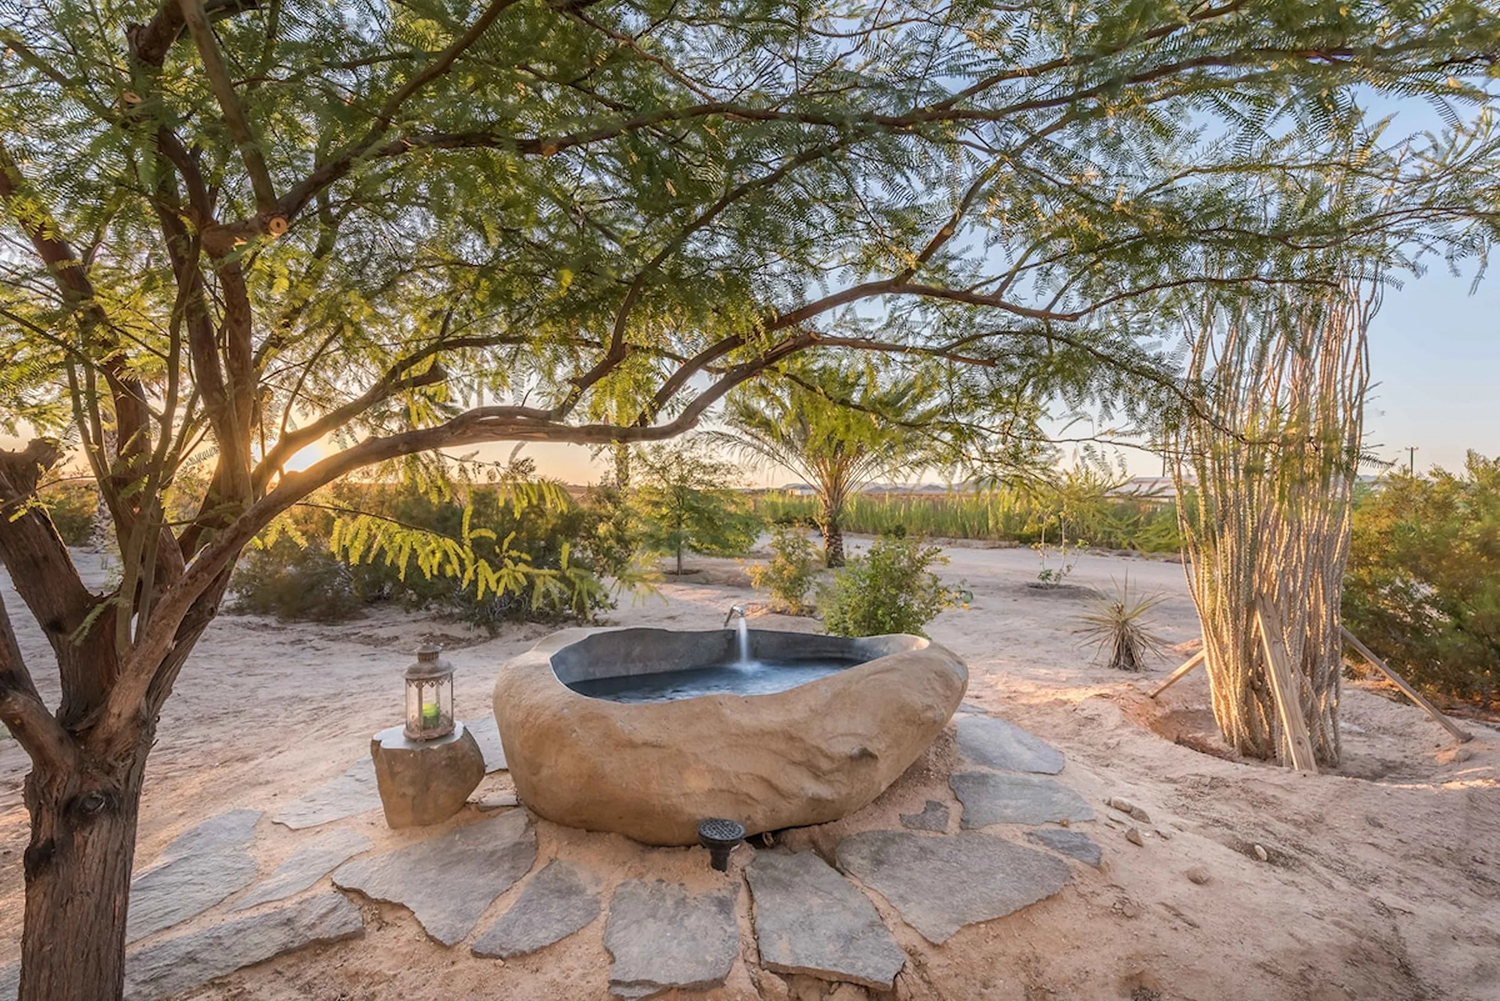 Outdoor hot springs tub with stone patio tiles and surrounded by desert vegetation at the Ocotillo Oasis in Wonder Valley, California.